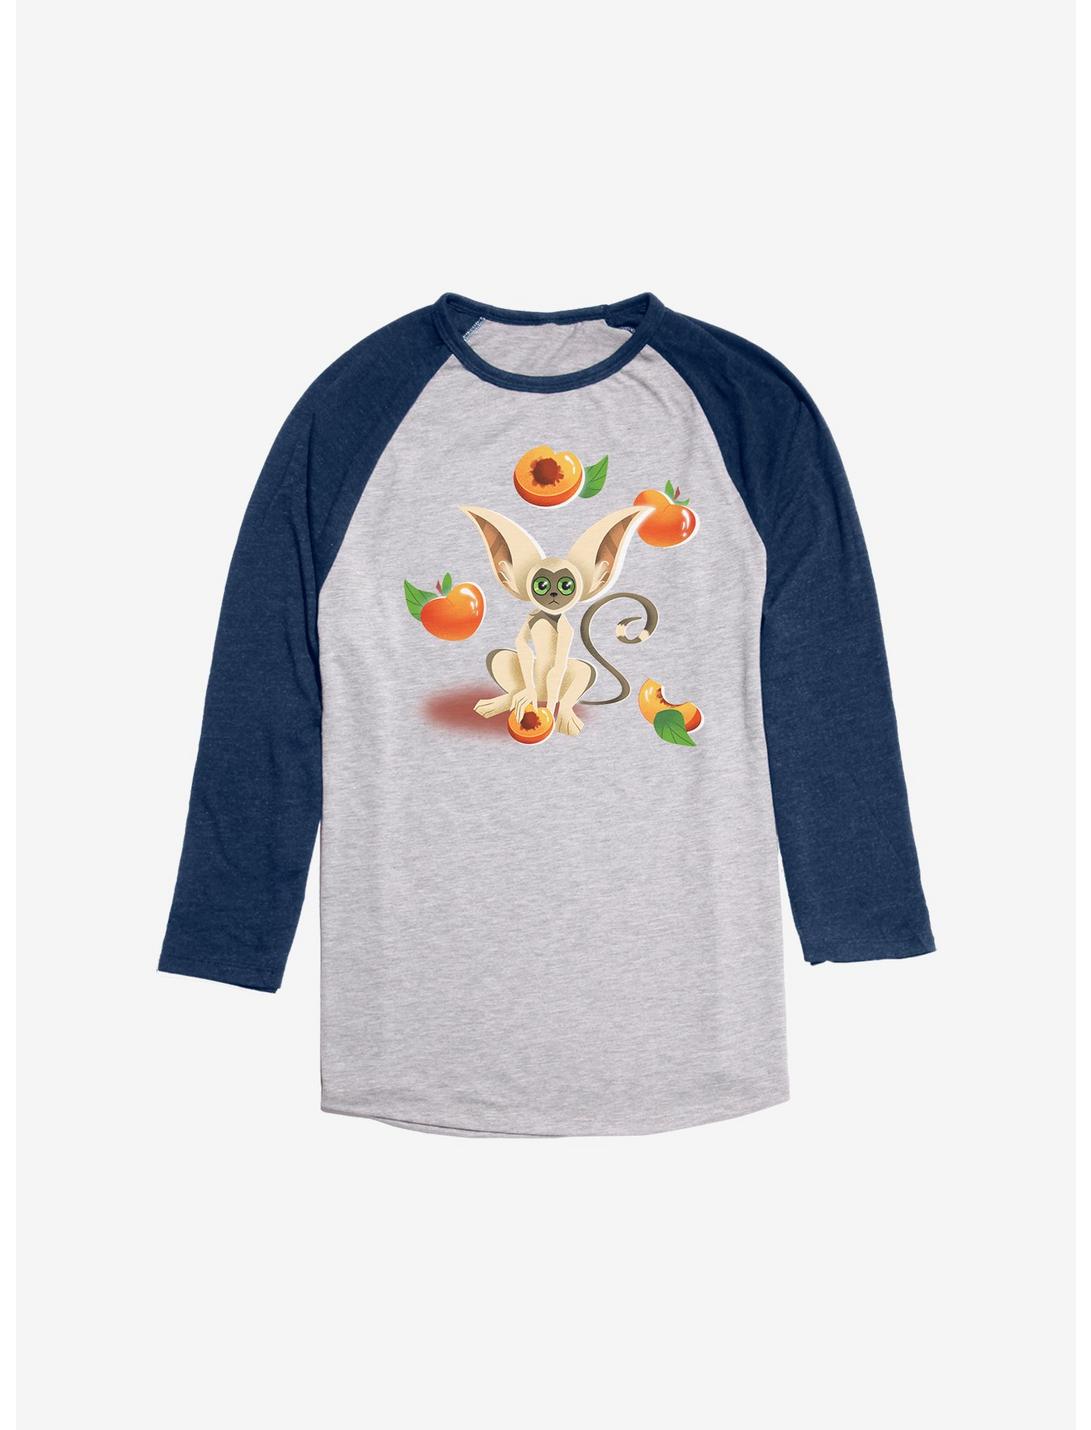 Avatar: The Last Airbender Peachy Keen Raglan, Ath Heather With Navy, hi-res